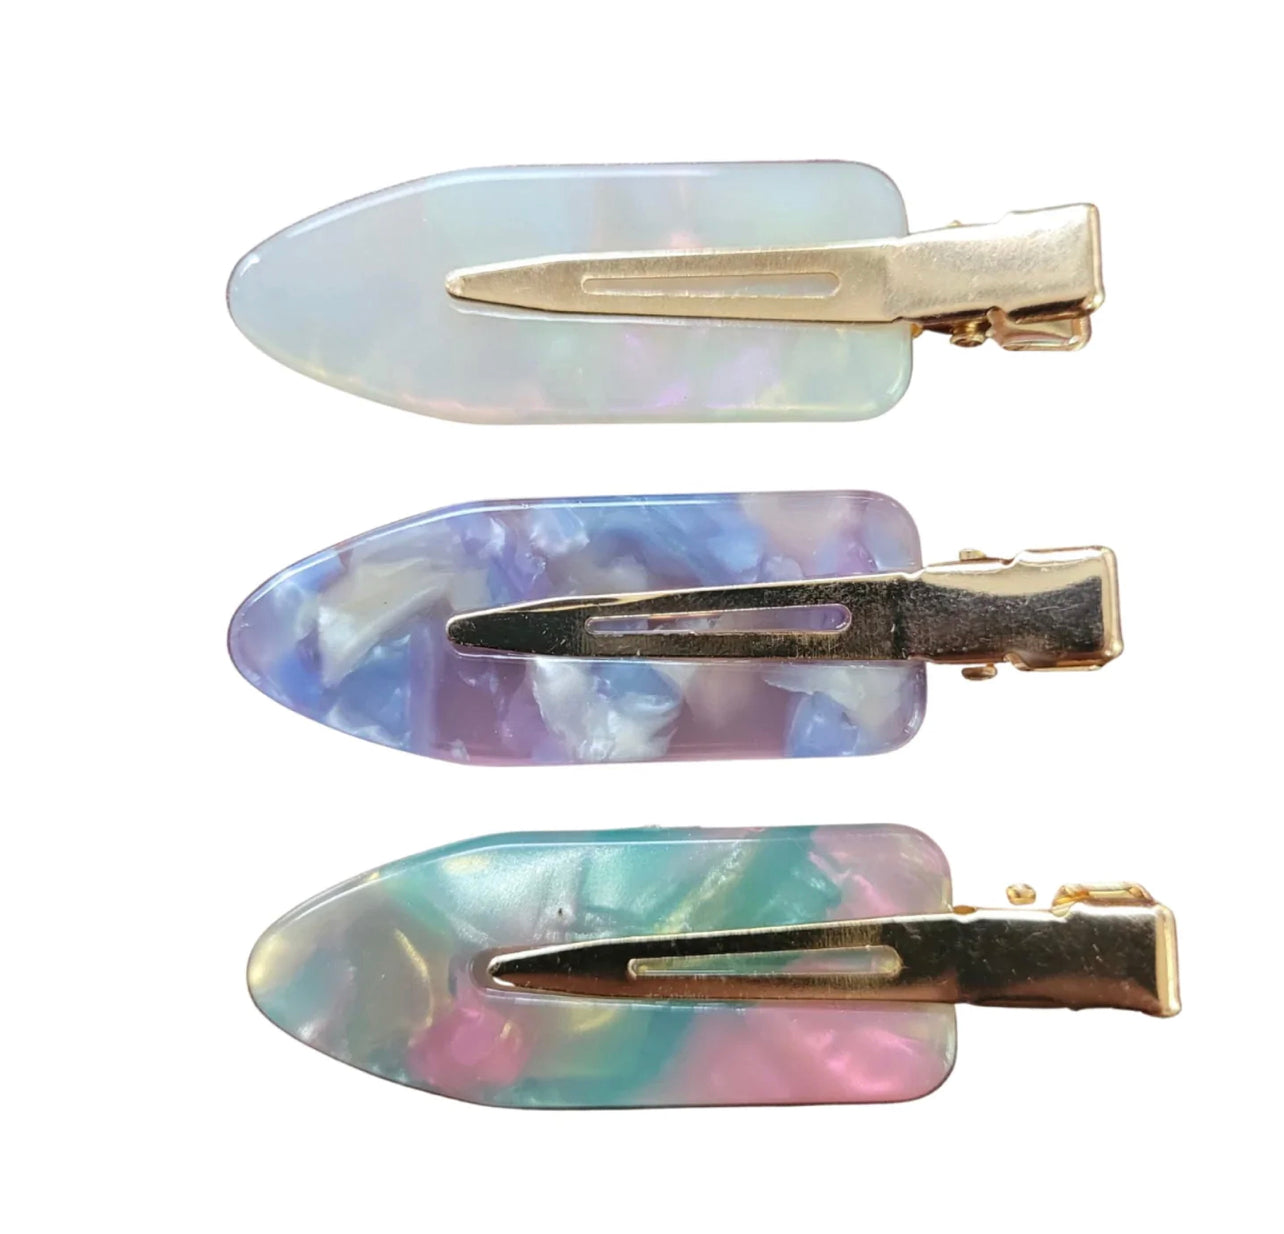  PP Creaseless Hair Styling Clips 3pk - Watercolour Dreaming  Phoenix Nationale